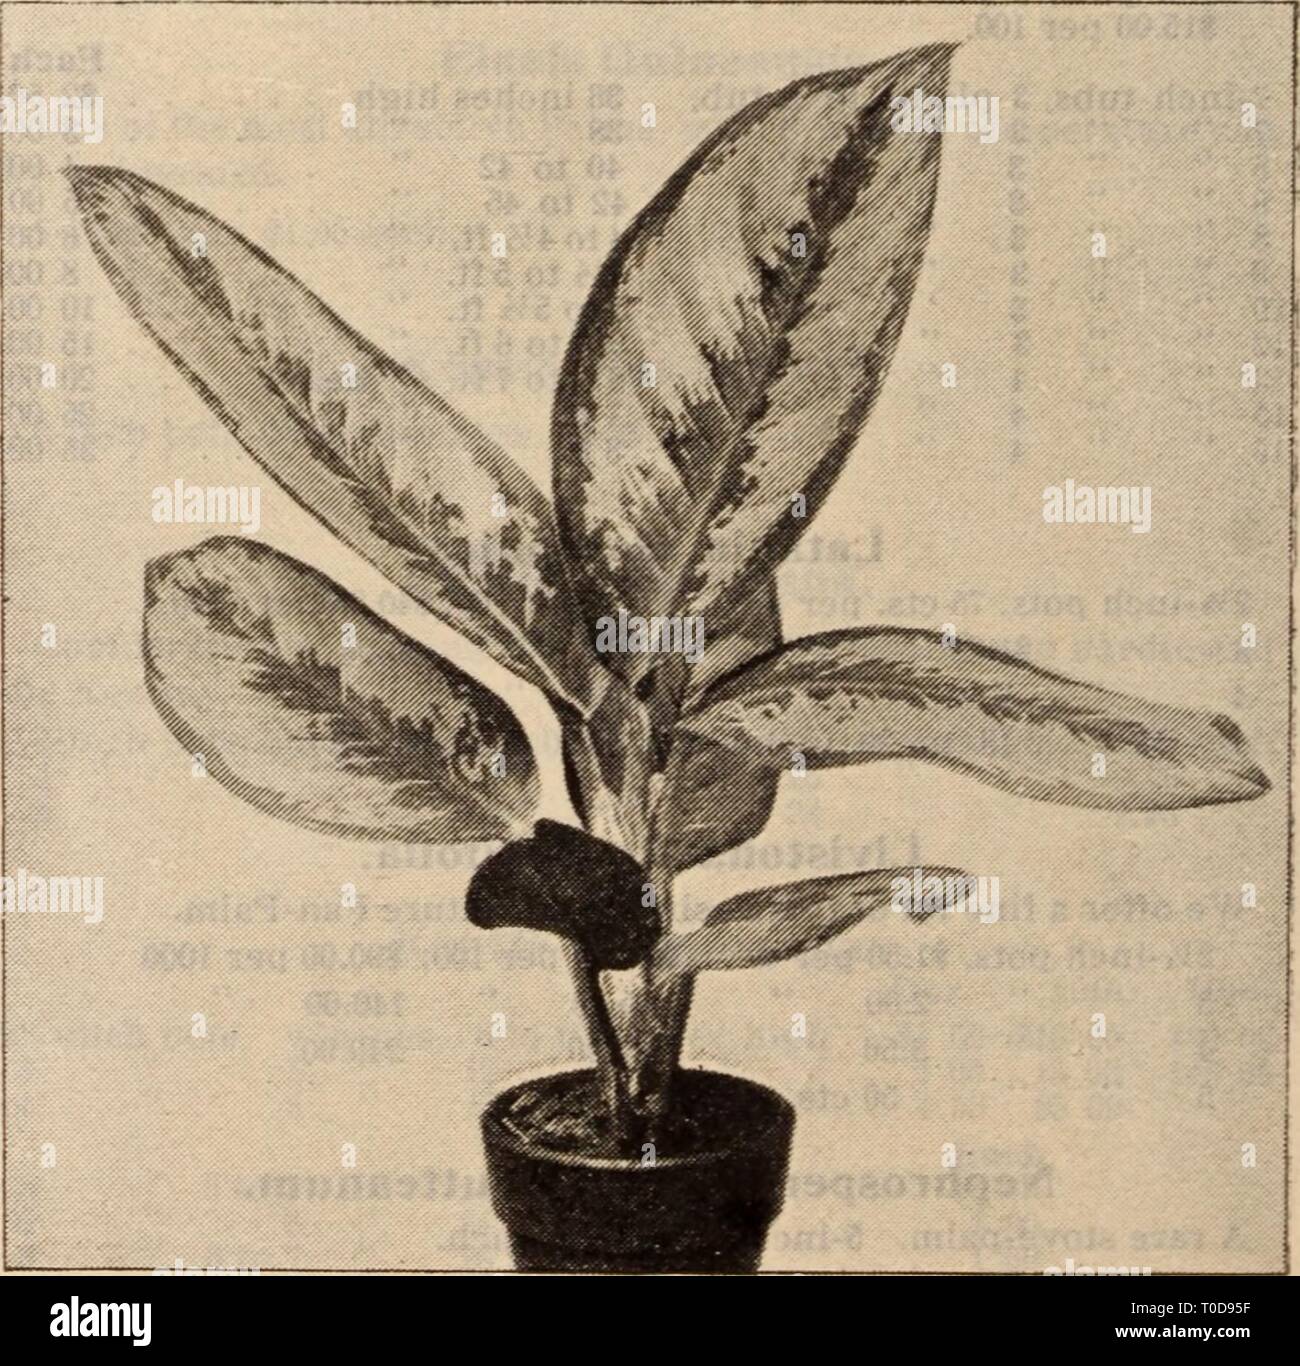 Dreer's wholesale price list  Dreer's wholesale price list / Henry A. Dreer. dreerswholesalep1912dree Year:   FORCING RHODODENDRON Smilax. 2'4-inch pots, 50 cts. per dozen; $3.50 per 100. Swainsona. Qaleslfolia Alba. 3-inch pots, $1.00 per doz.; $7.00 per 100. Stigmaphyllon Ciliatum. (Brazilian Golden or Orchid Vine.) One of our most beautiful flowering climbers, either for the greenhouse or open air. 15 cts. each; $1.50 per doz. Sparmania Africana. A good, winter flowering plant for the amateur's conservatory or window garden. 3-inch pots, 15 cts. each; $1.50 per dozen. Thunbergia Harrisii. A Stock Photo